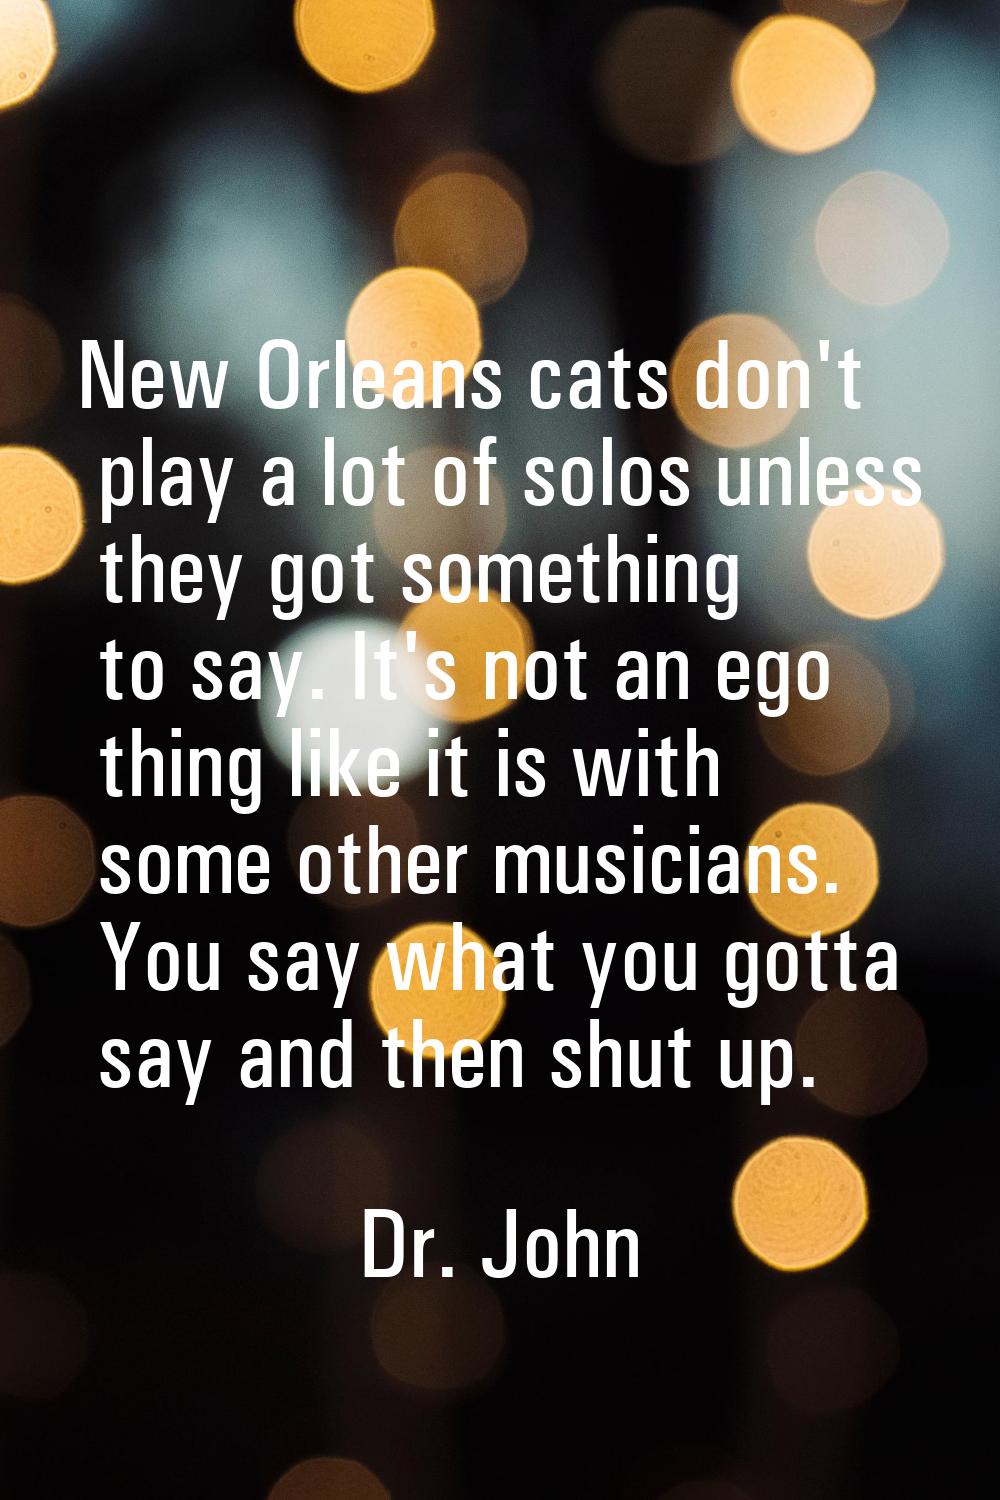 New Orleans cats don't play a lot of solos unless they got something to say. It's not an ego thing 